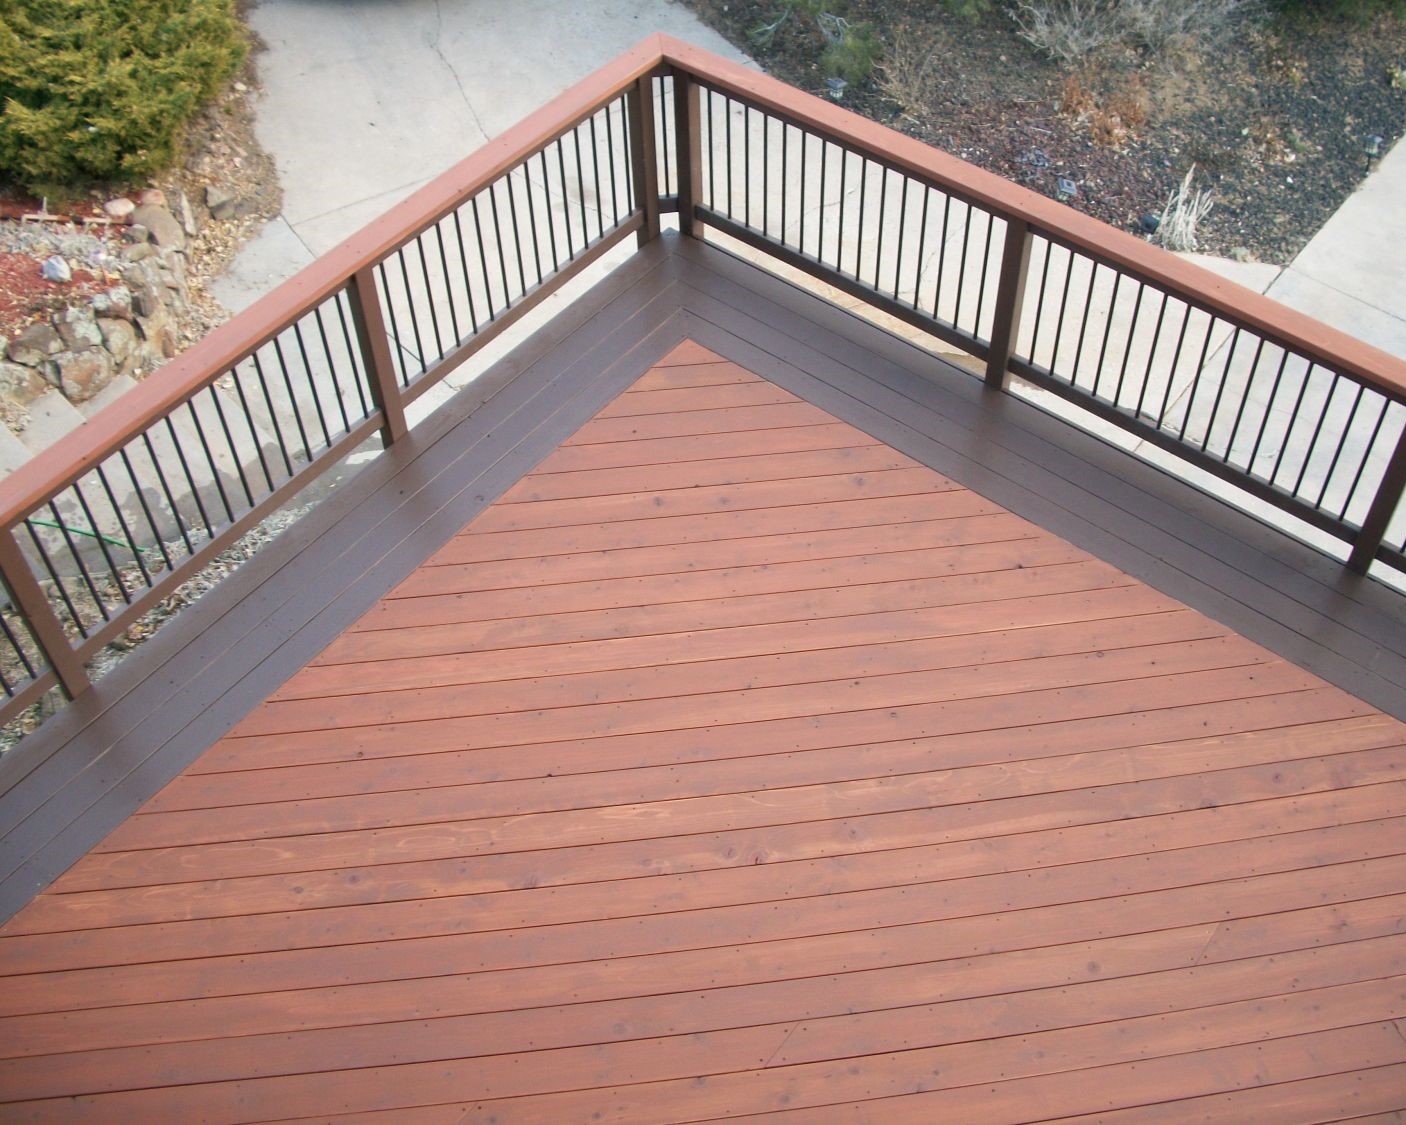 Redwood decking at a 45-degree angle with a four-board picture frame border stained in a contrasting color